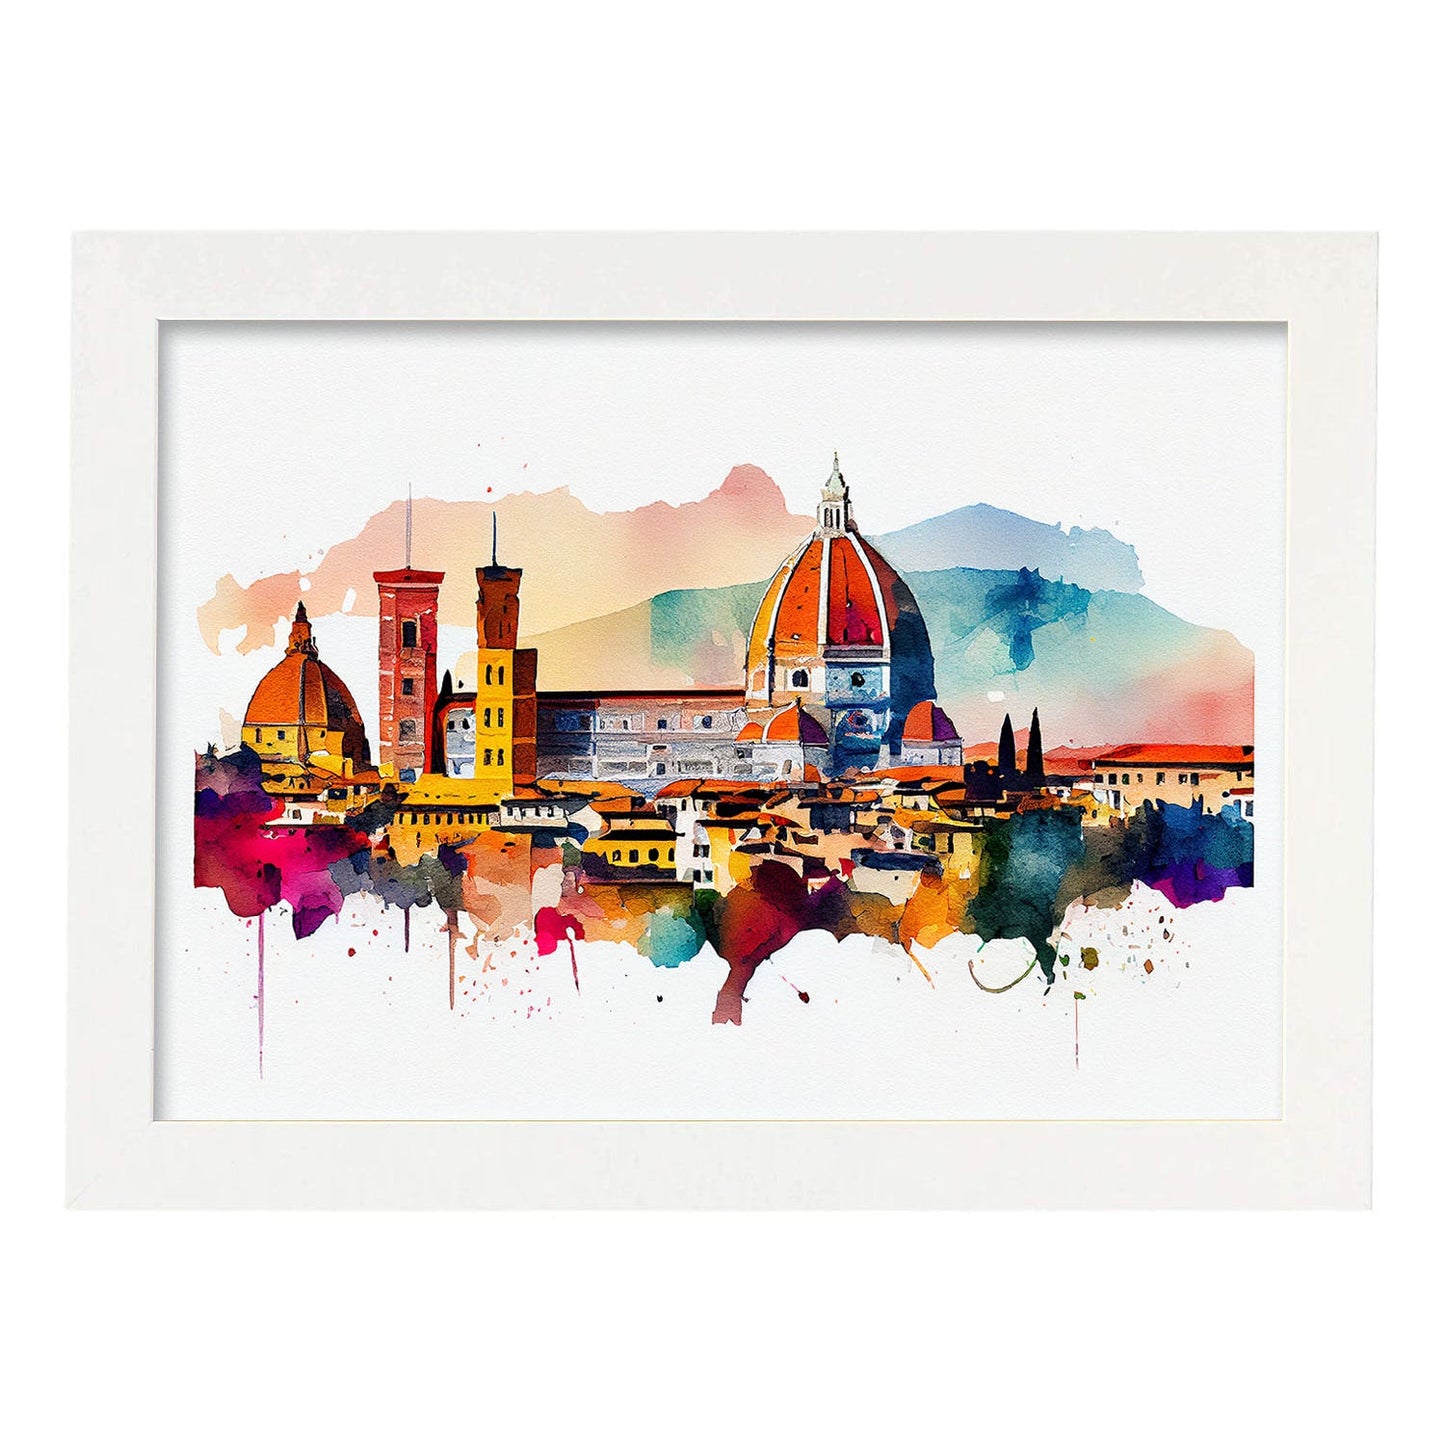 Nacnic watercolor of a skyline of the city of Florence_4. Aesthetic Wall Art Prints for Bedroom or Living Room Design.-Artwork-Nacnic-A4-Marco Blanco-Nacnic Estudio SL